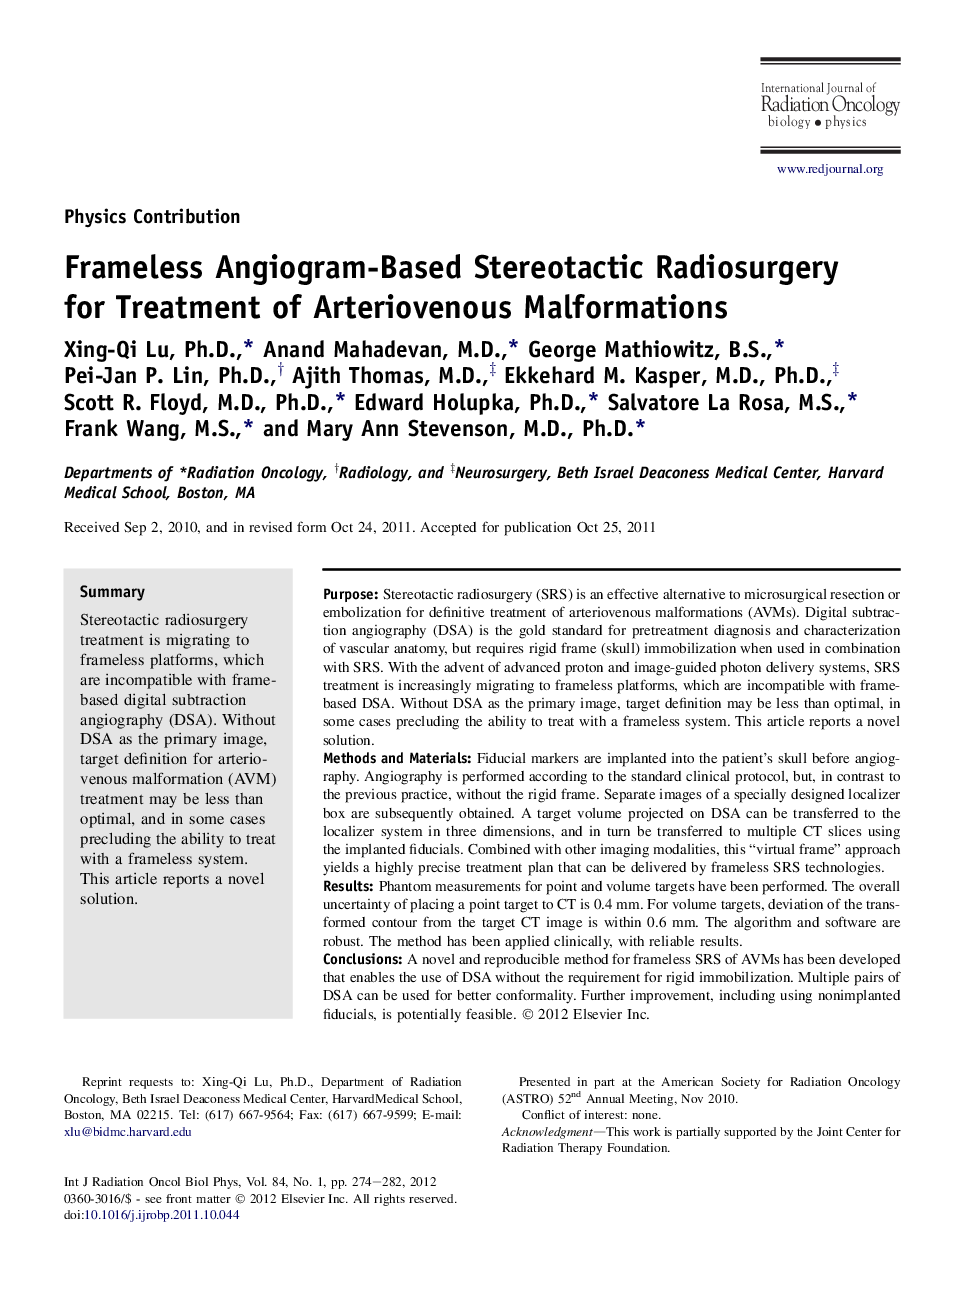 Frameless Angiogram-Based Stereotactic Radiosurgery for Treatment of Arteriovenous Malformations